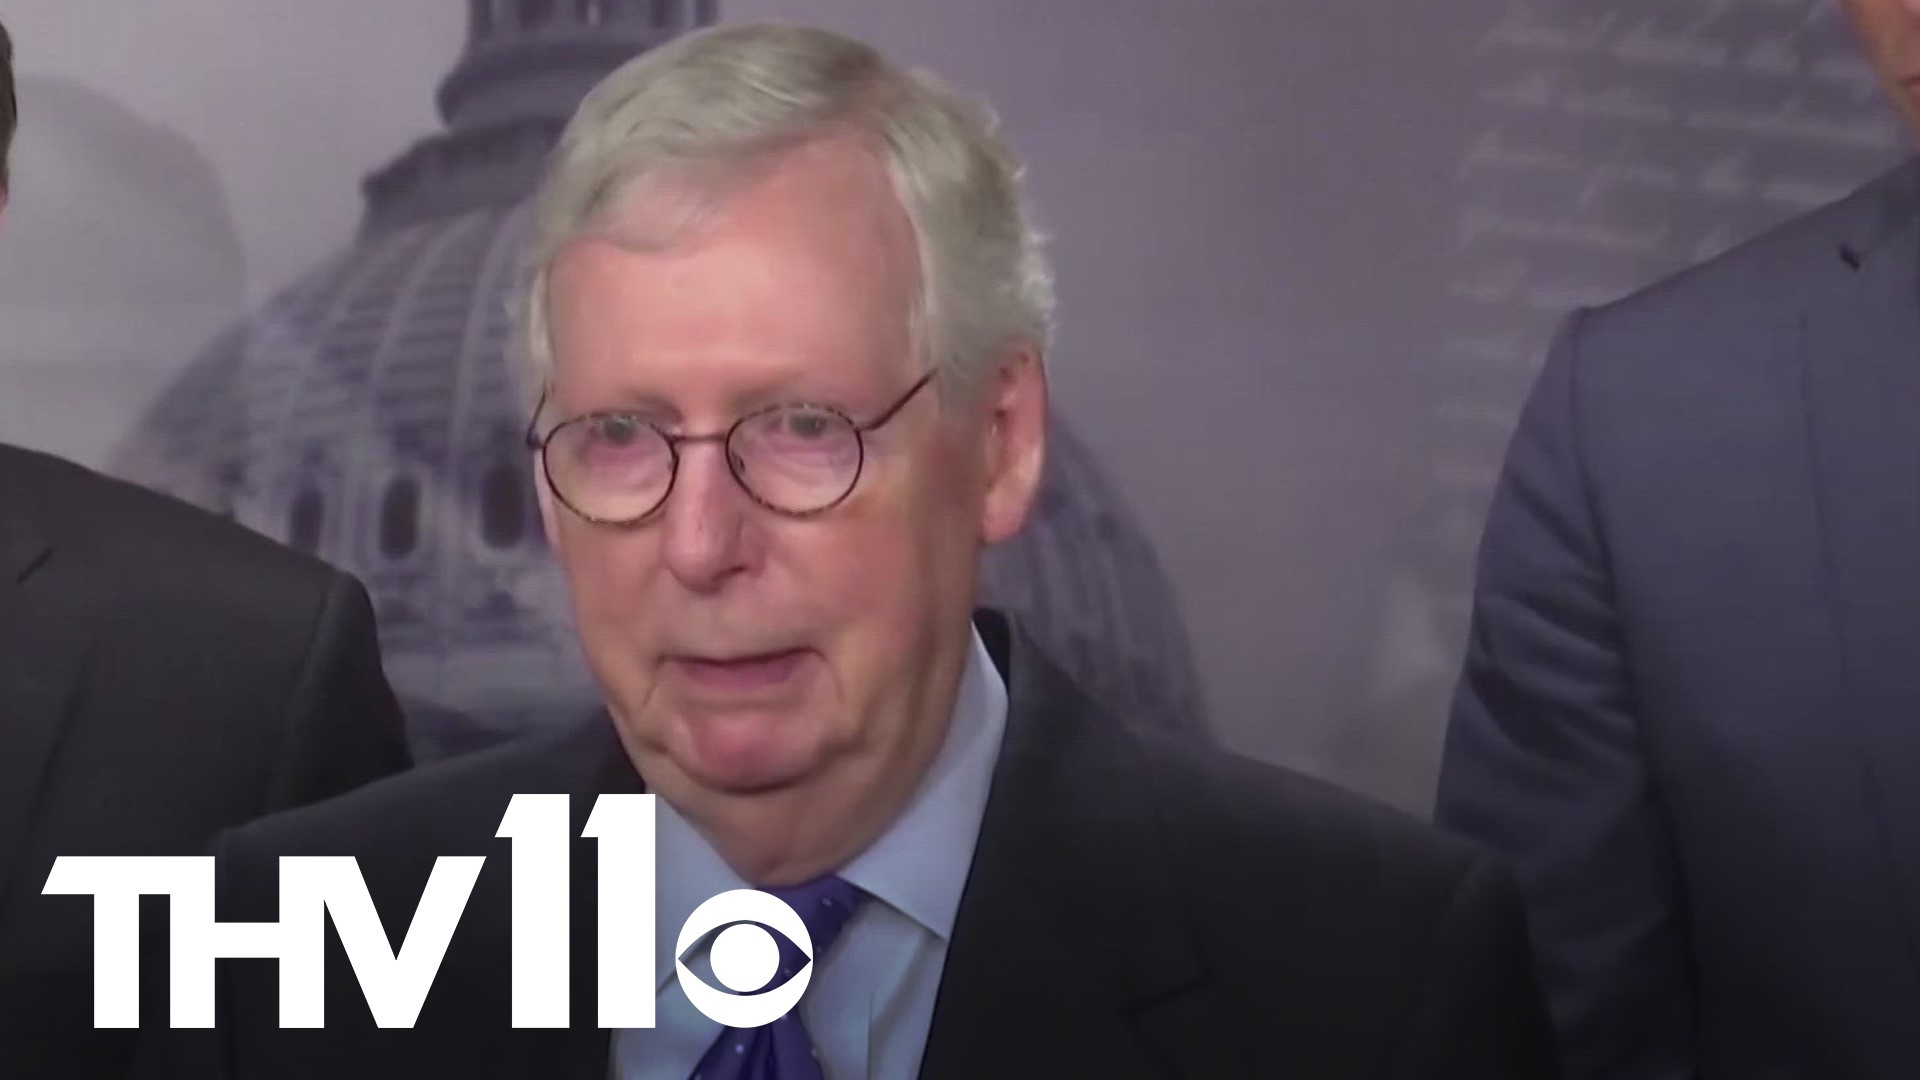 Senator Minority Leader Mitch McConnell remains hospitalized in Washington with a concussion after he tripped and fell at a private dinner in a hotel.